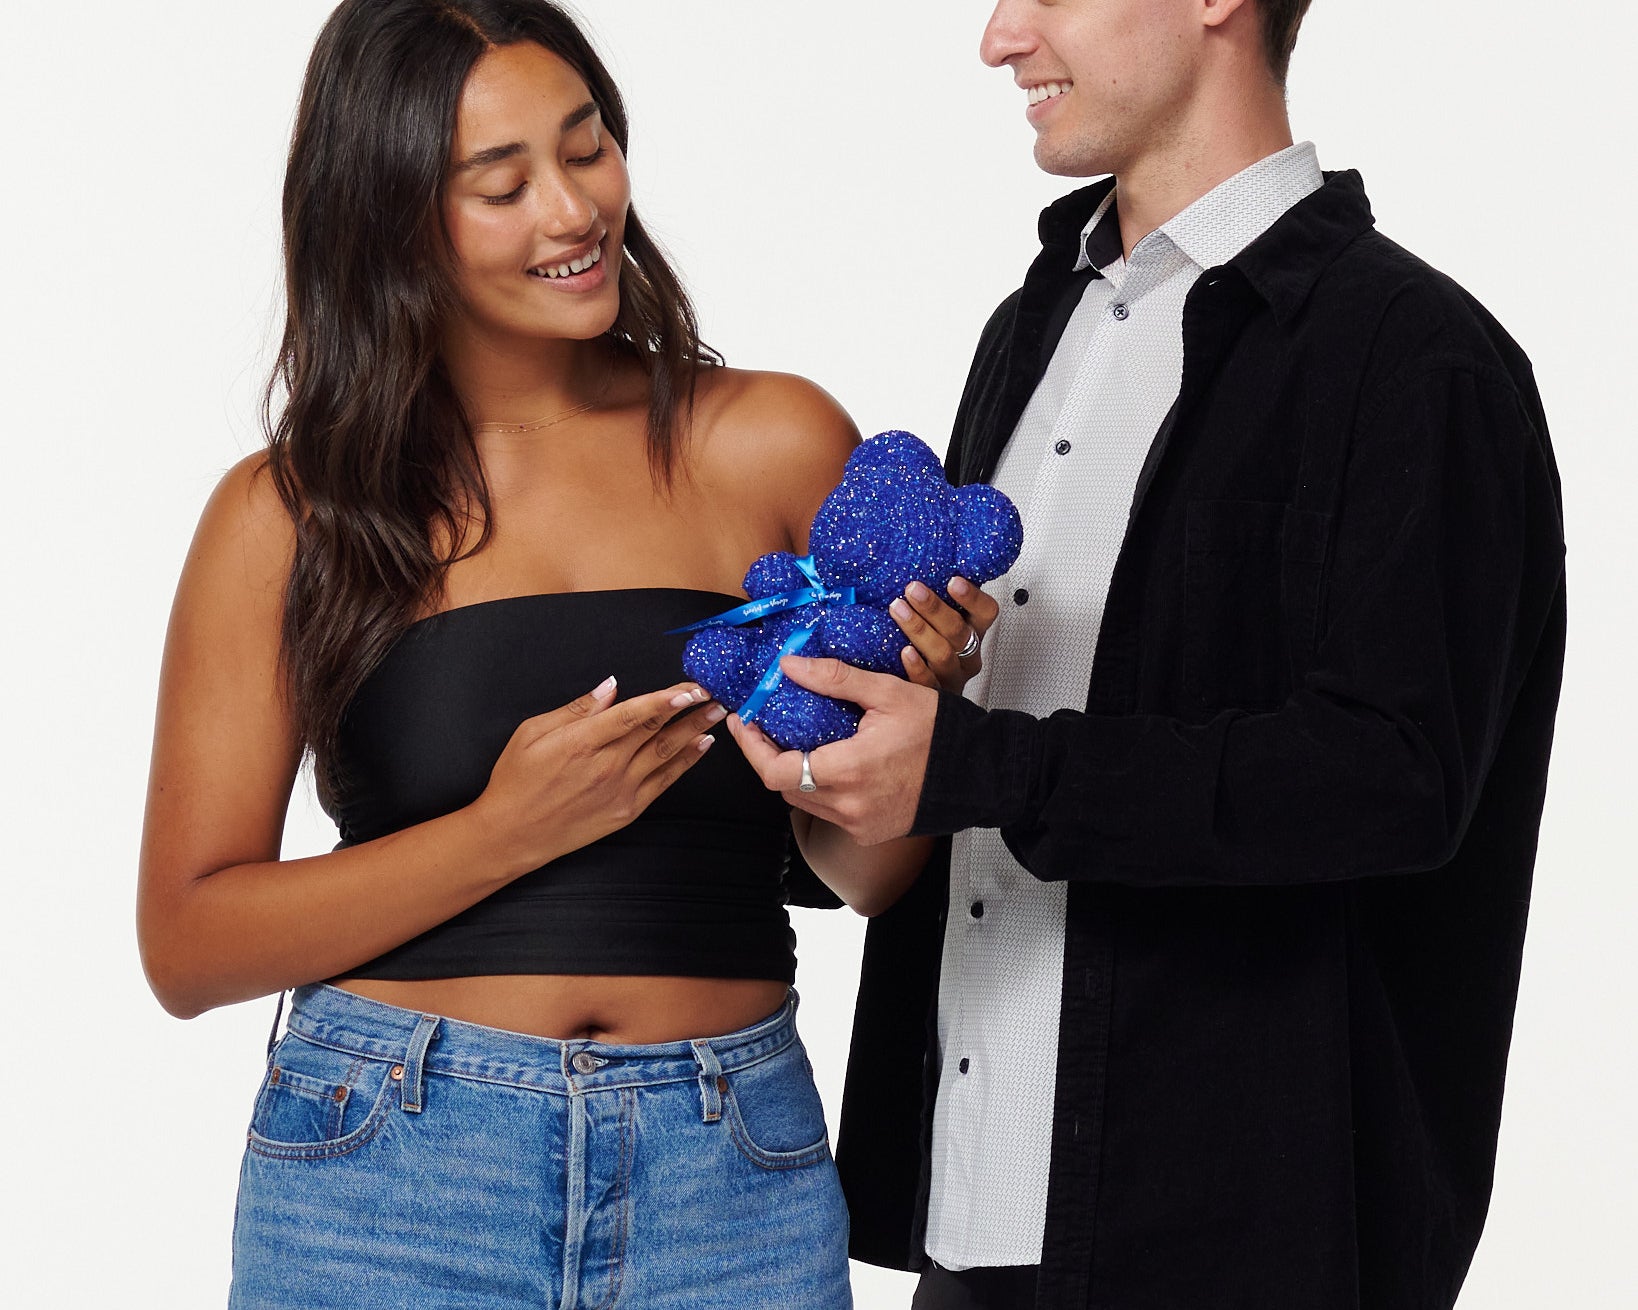 A woman in a black cropped top and blue jeans admires a blue, sparkly teddy bear with a bright blue ribbon, smiling at it. A man in a black jacket and white shirt stands beside her, looking at the teddy bear and smiling, his hands placed on the bear, as they share a moment of appreciation.